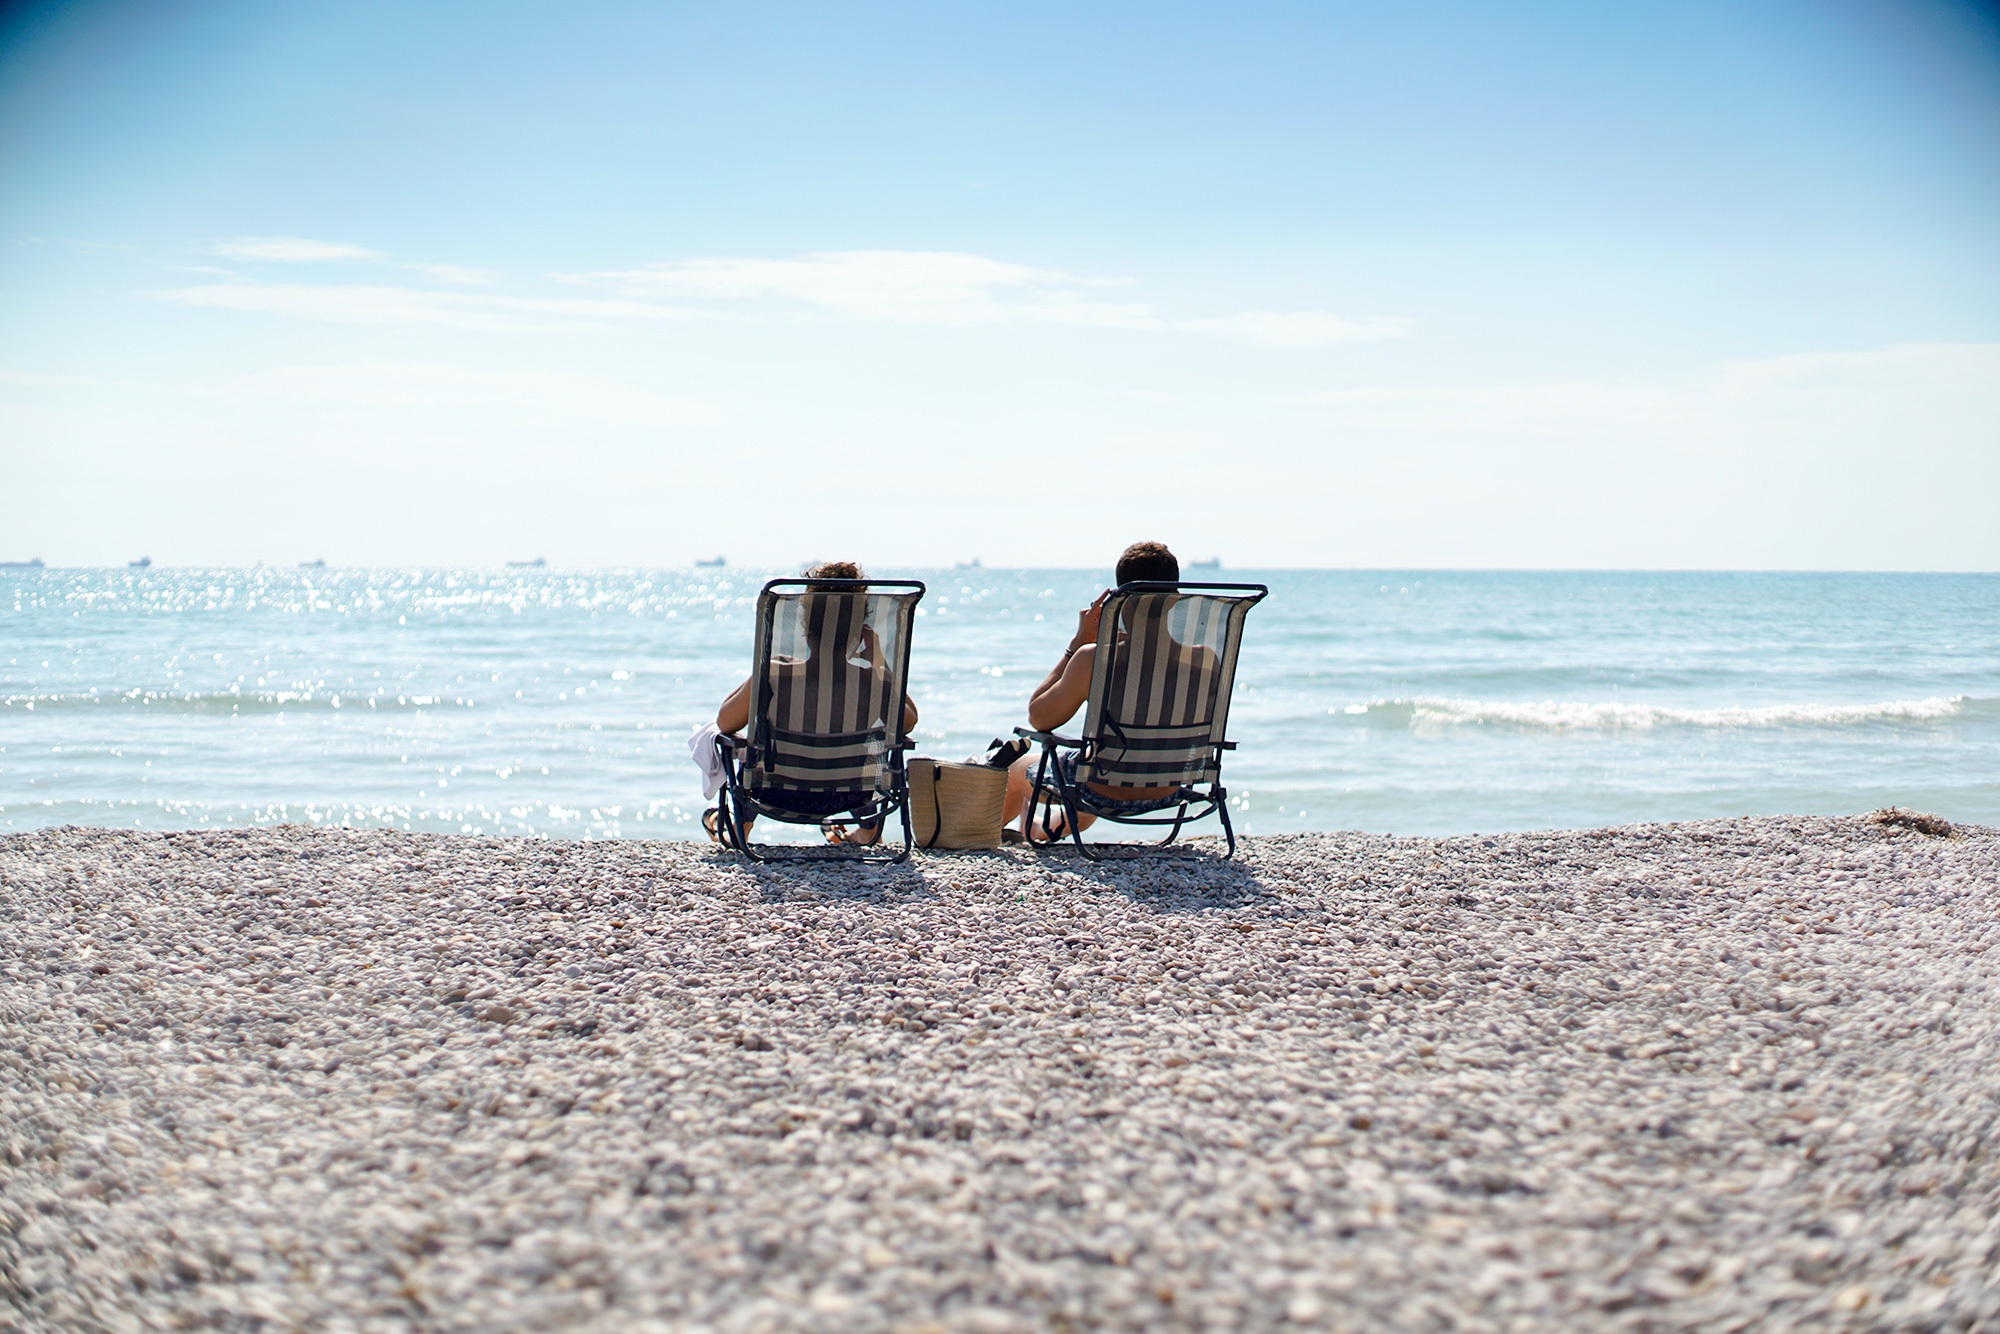 File:Couple sitting at the beach (22334163255).jpg - Wikimedia Commons